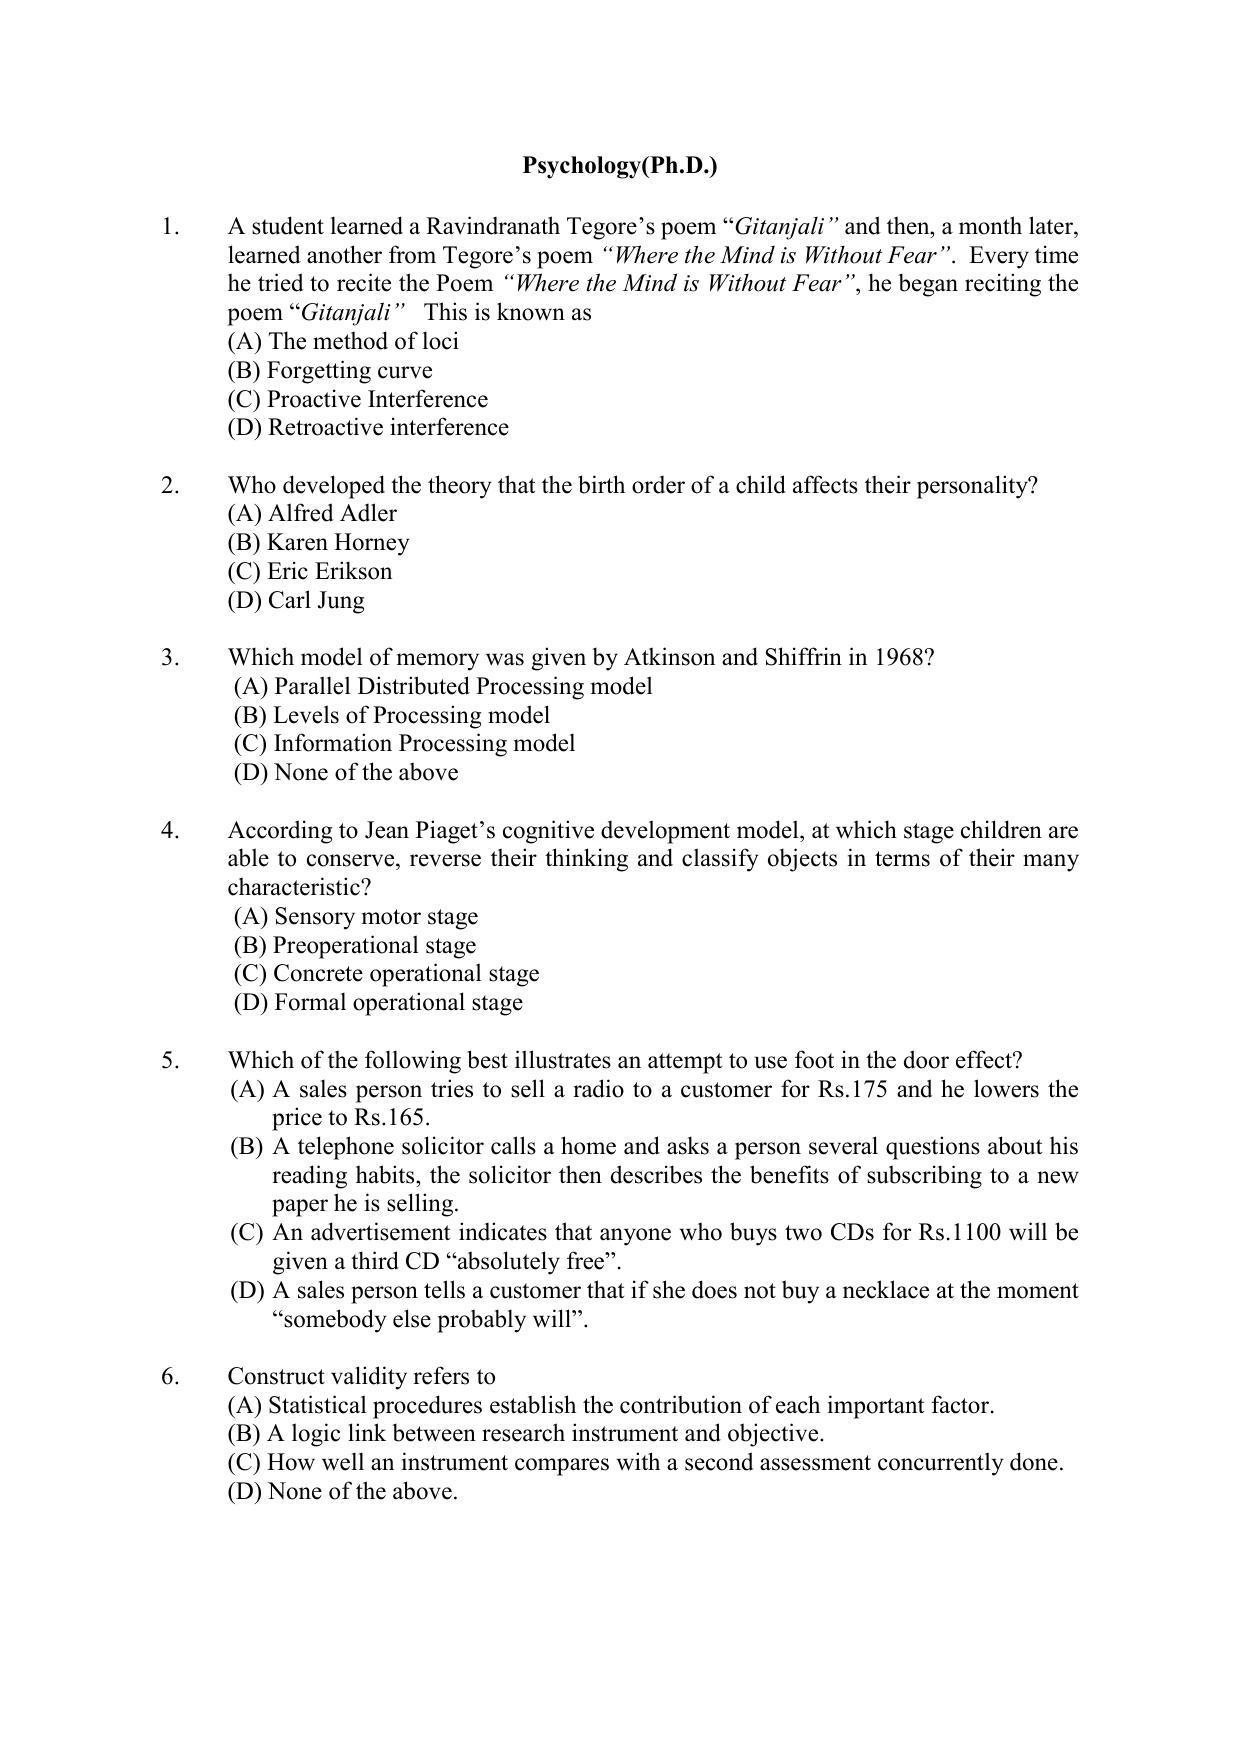 PU MPET Ancient Indian History & Archeology 2022 Question Papers - Page 32